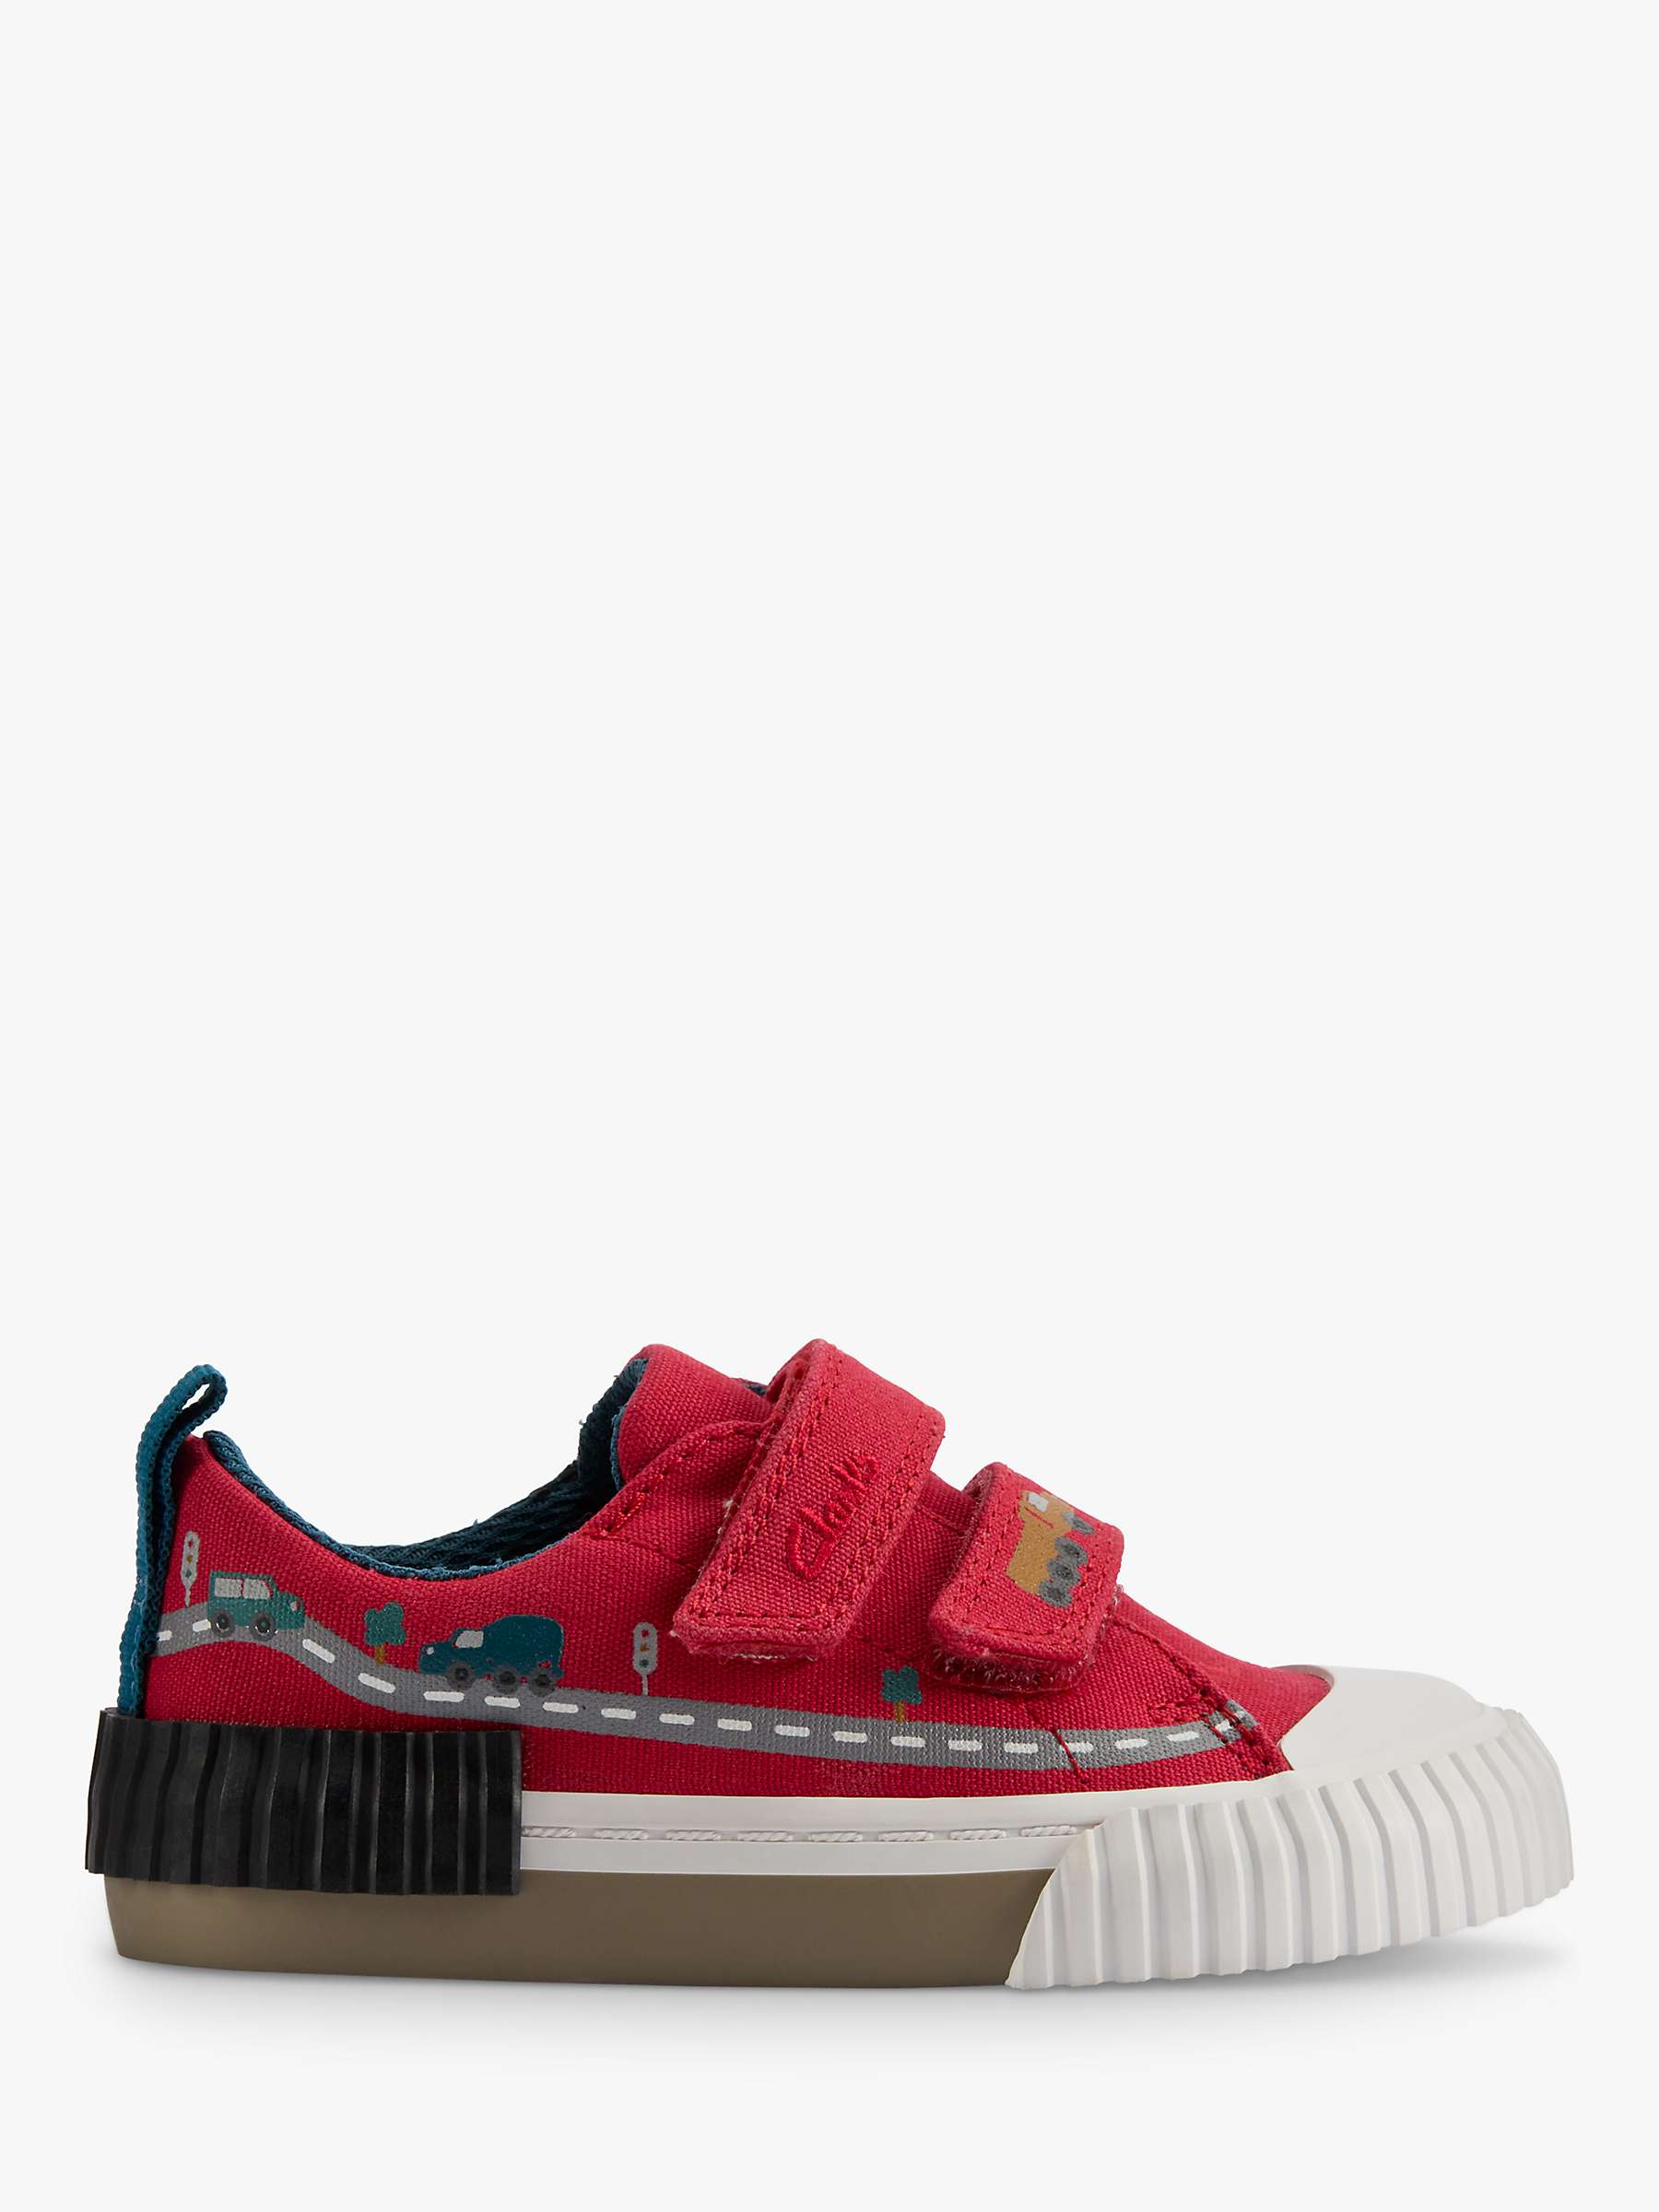 Buy Clarks Kids' Foxing Truck Canvas Shoes, Red/Multi Online at johnlewis.com